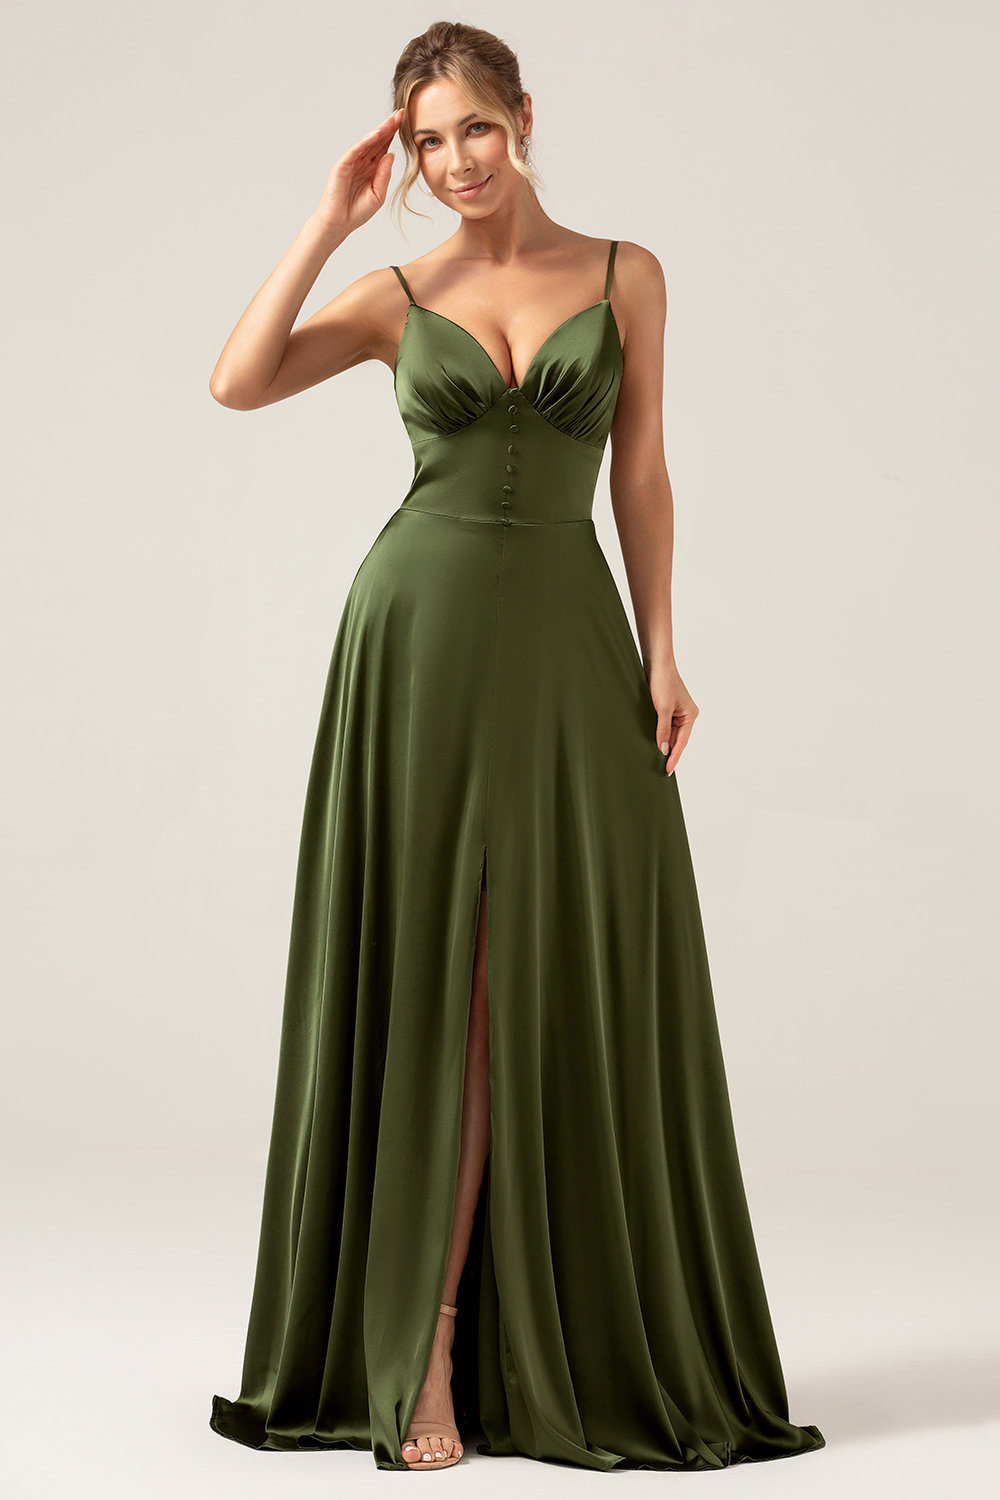 Olive A Line Spaghetti Straps Long Bridesmaid Dress with Slit